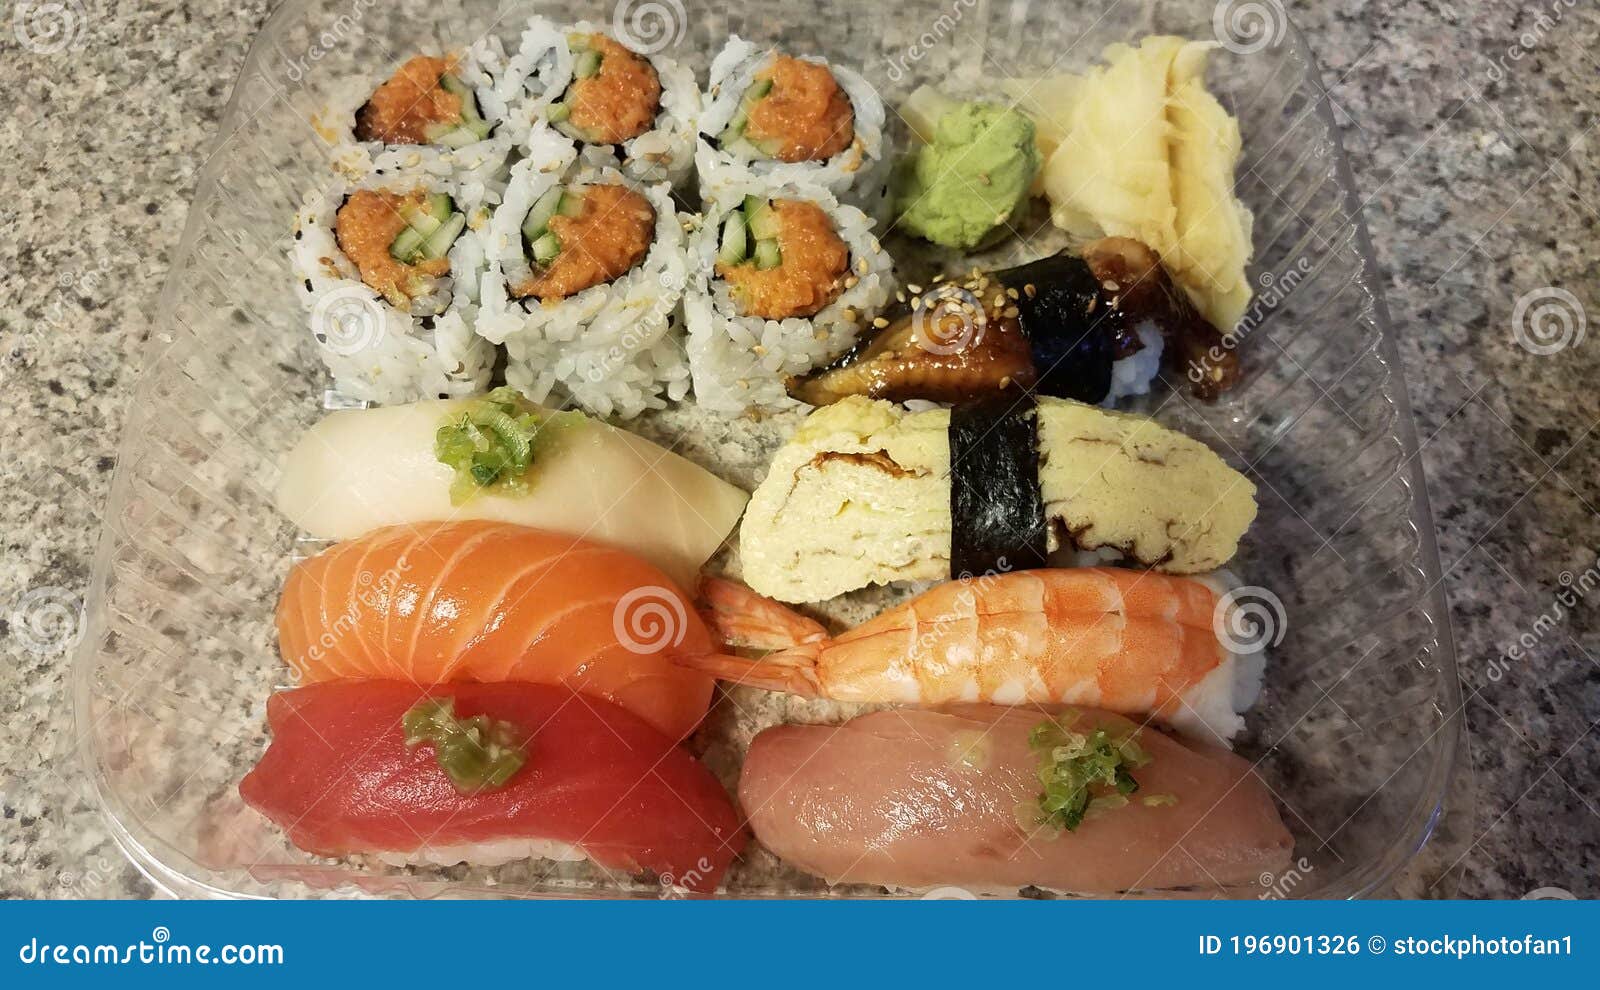 https://thumbs.dreamstime.com/z/salmon-tuna-rice-sushi-plastic-container-raw-counter-196901326.jpg